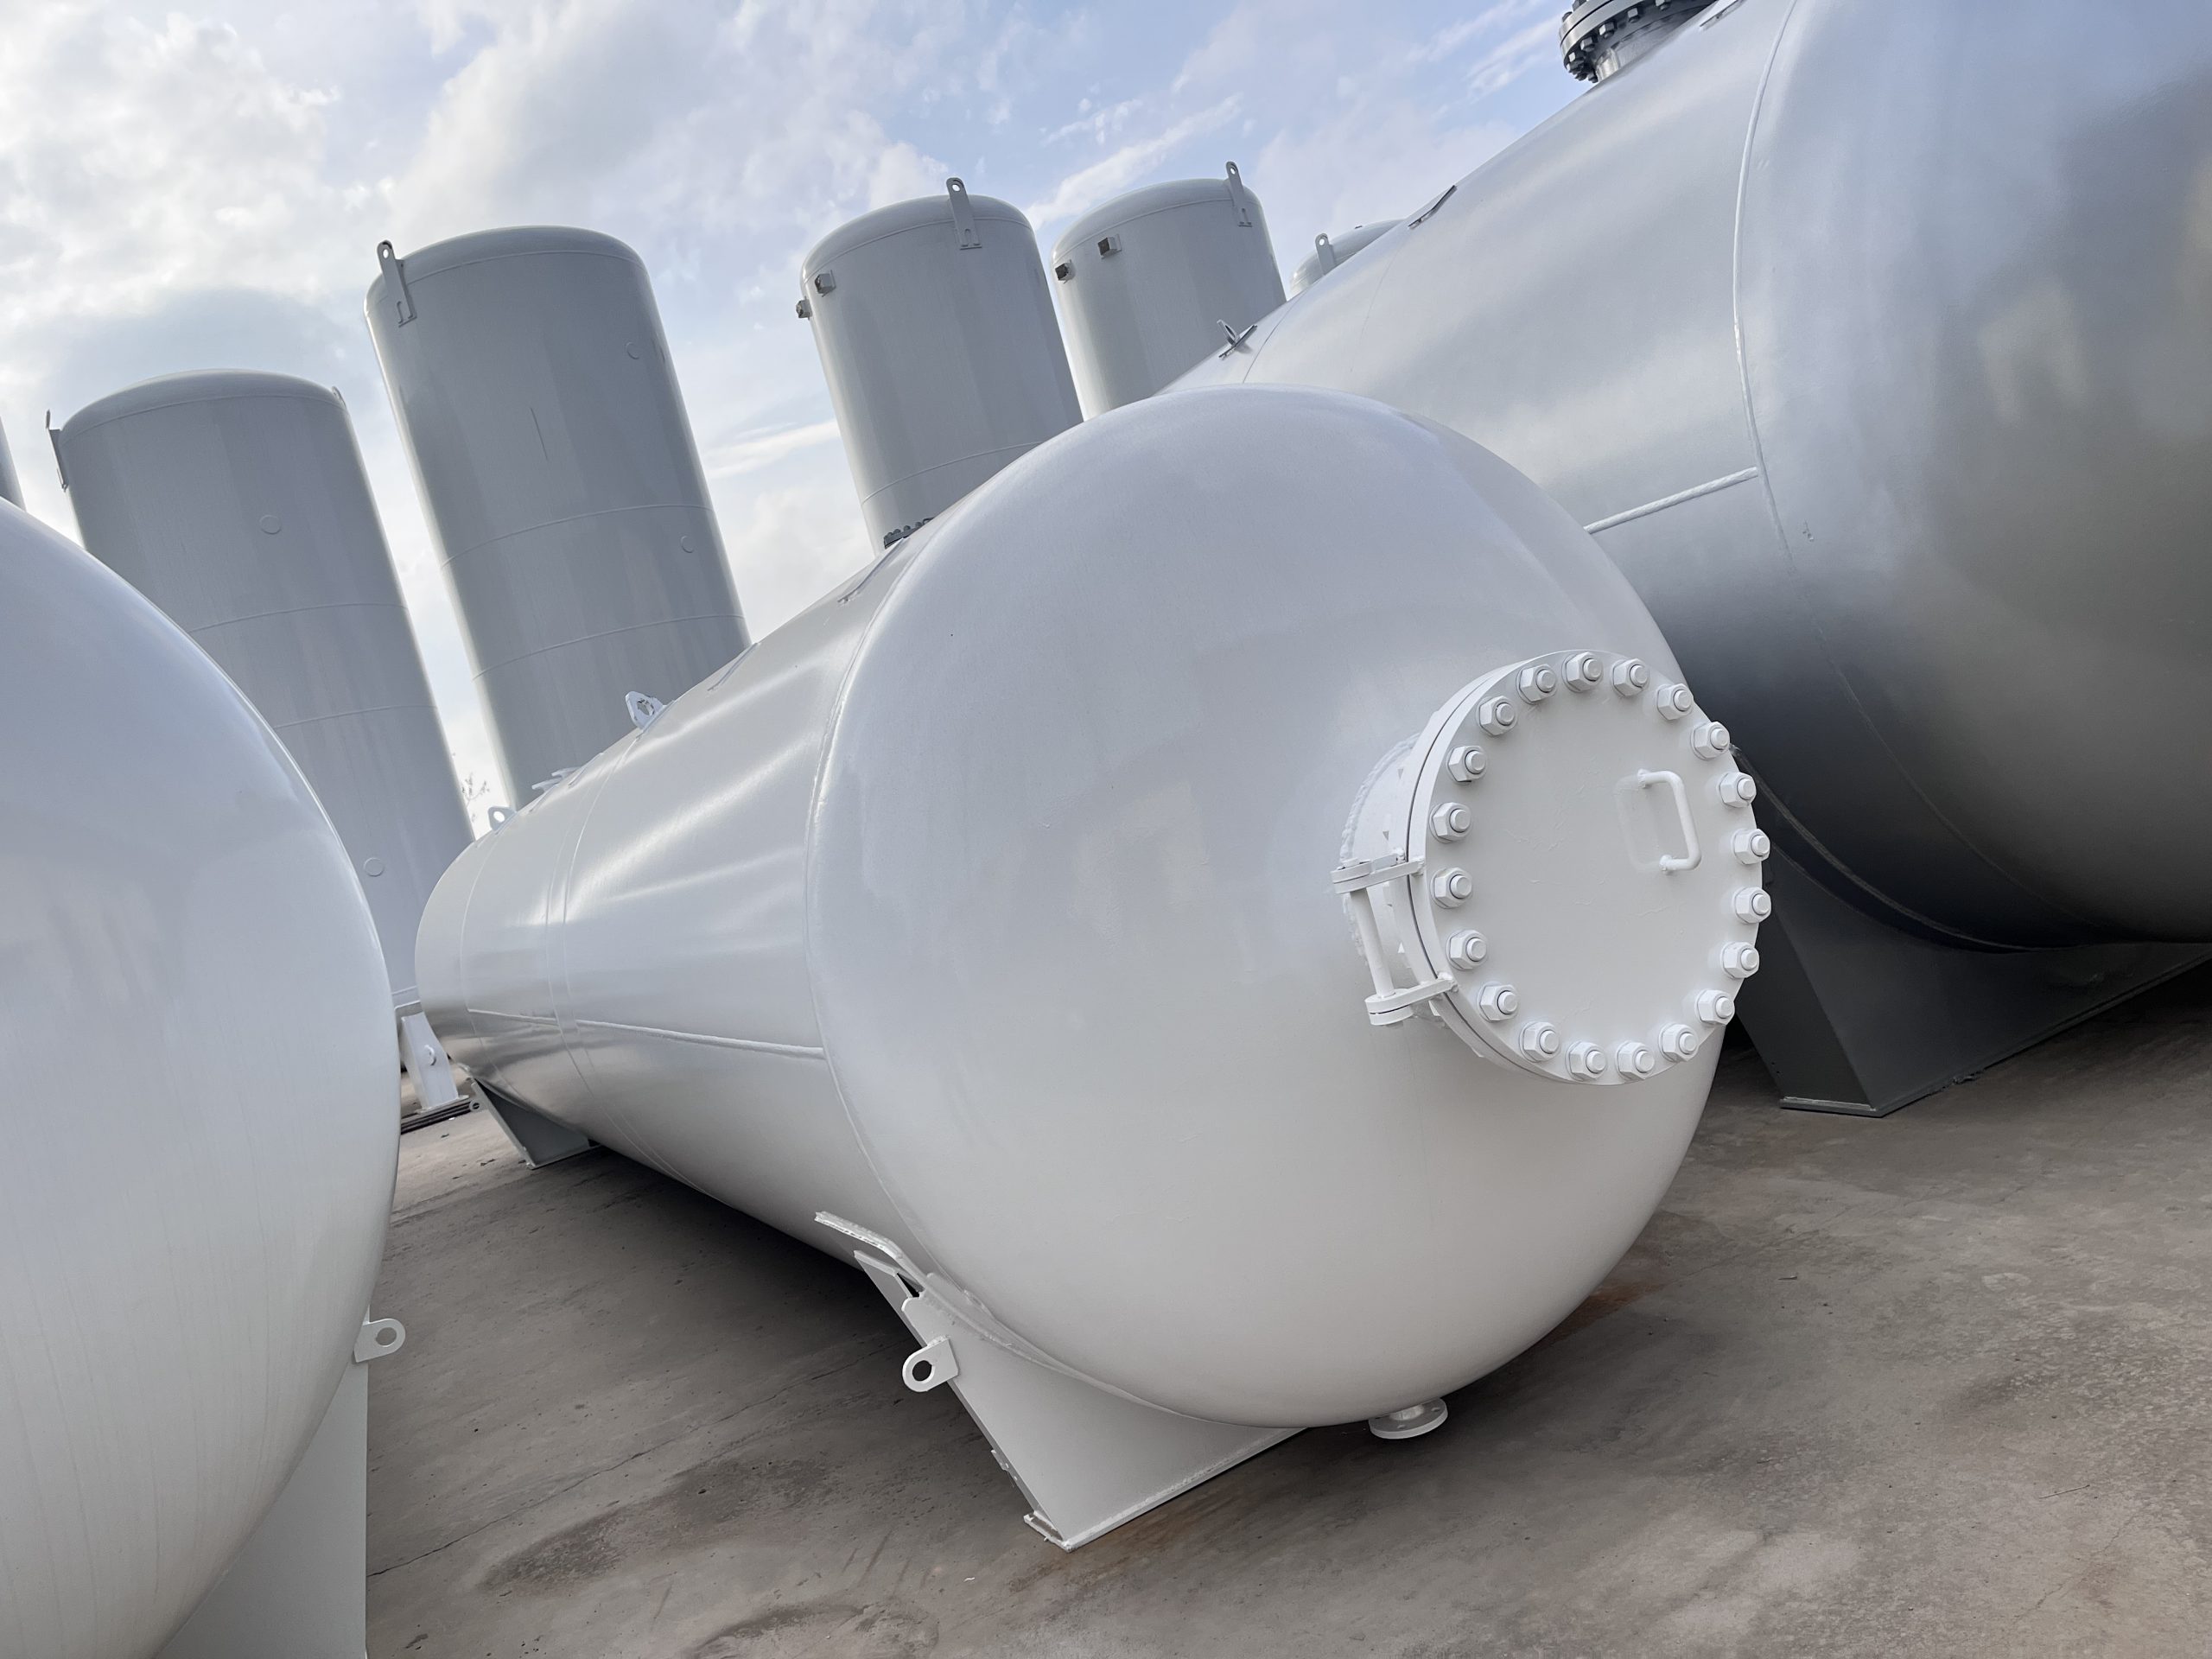 The main structural features of cryogenic storage tanks: